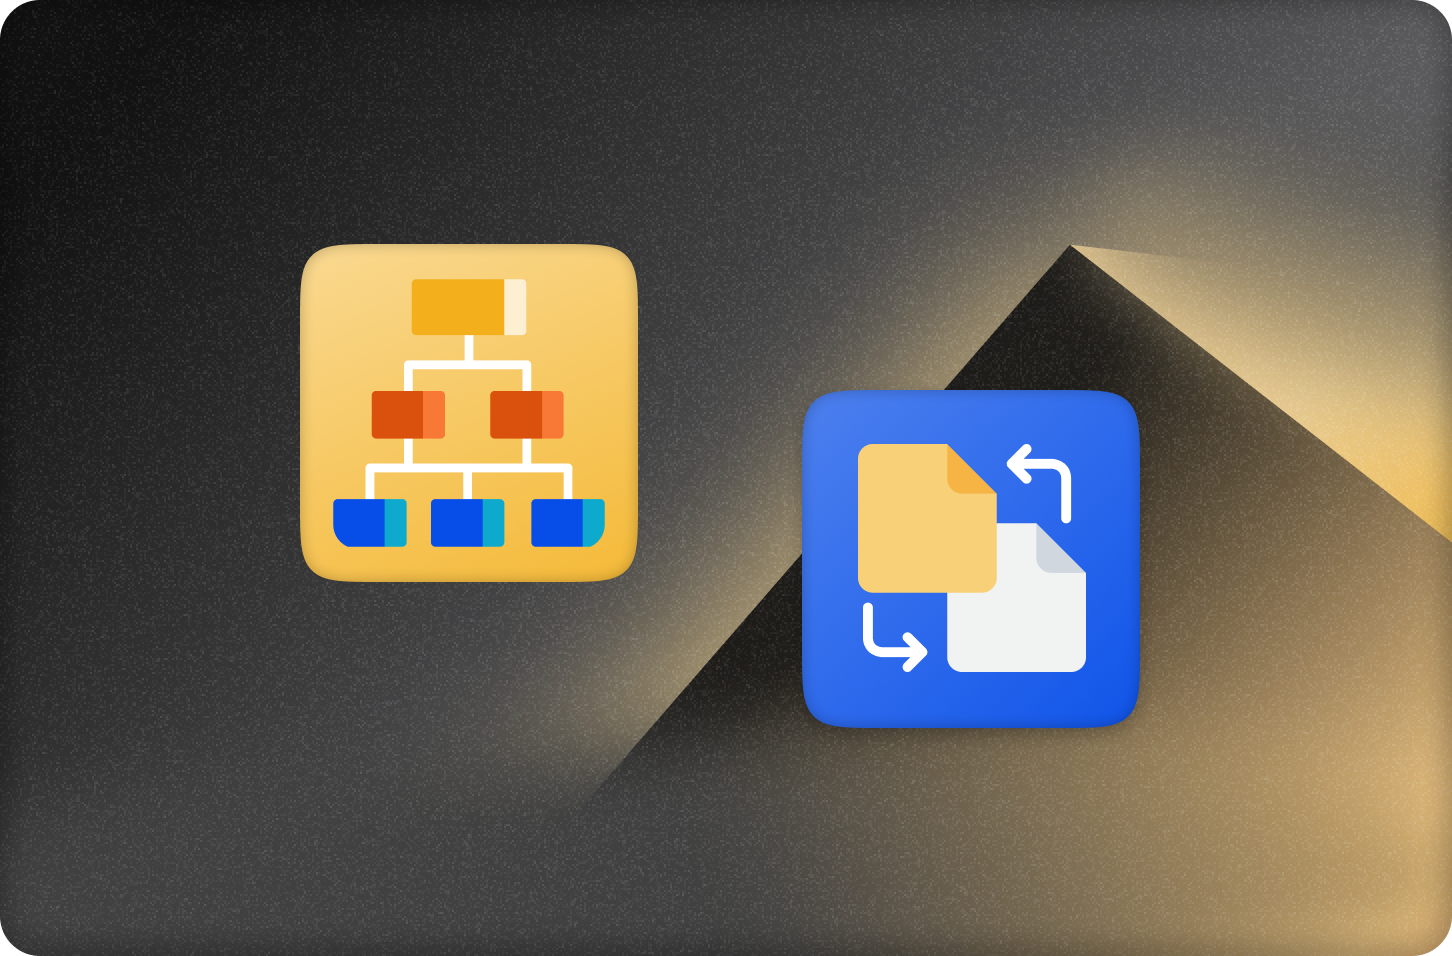 Icon of a schema in a yellow box next to an icon of a file migration in a black box